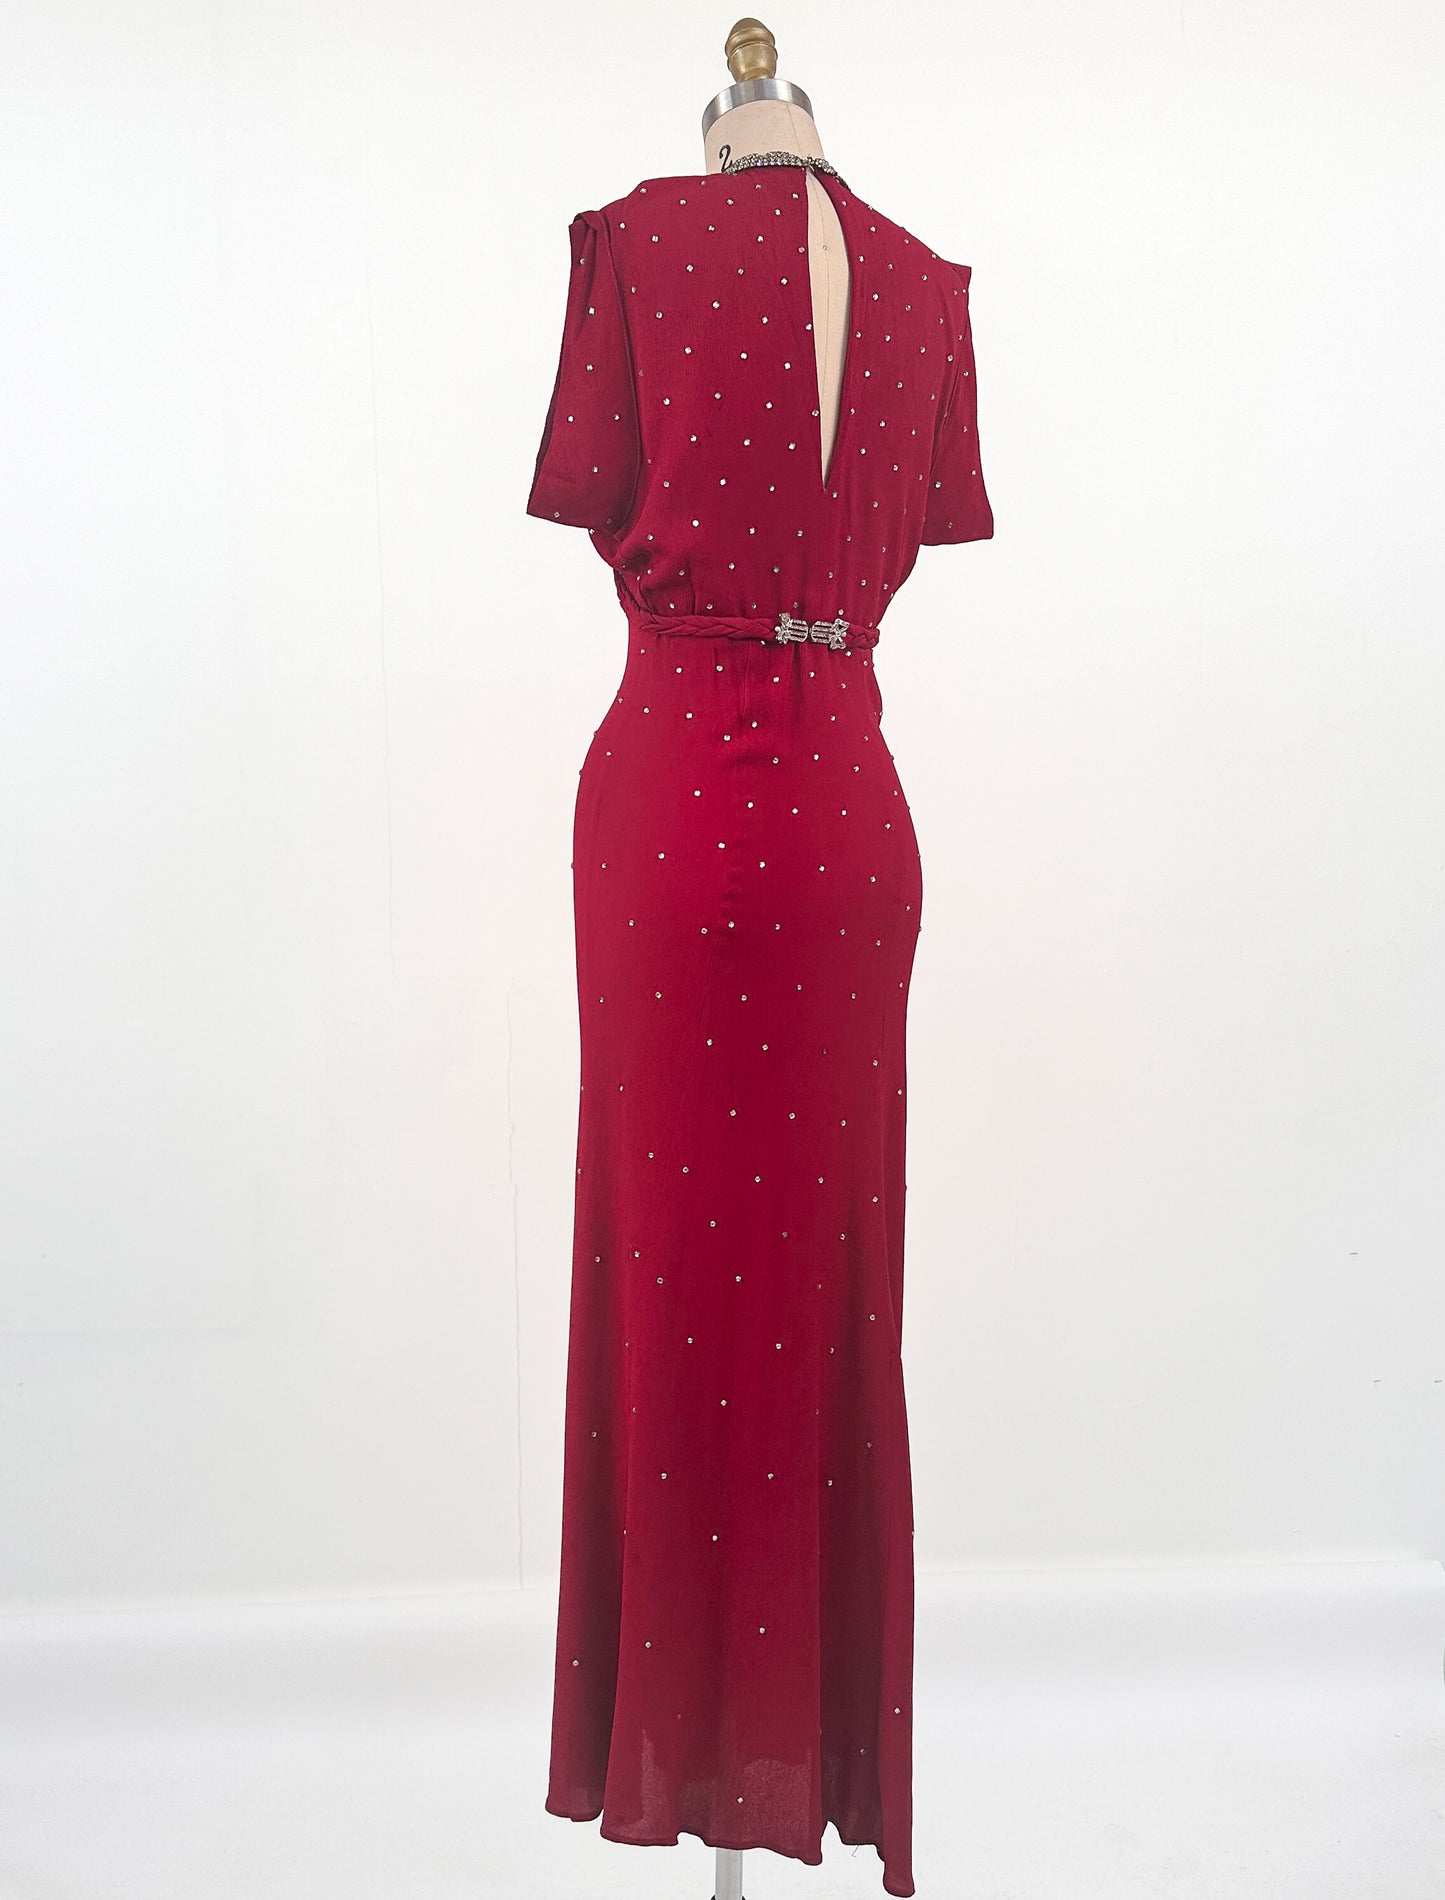 1940s Crimson Red Crepe Gown with Rhinestone Accents / Waist 26